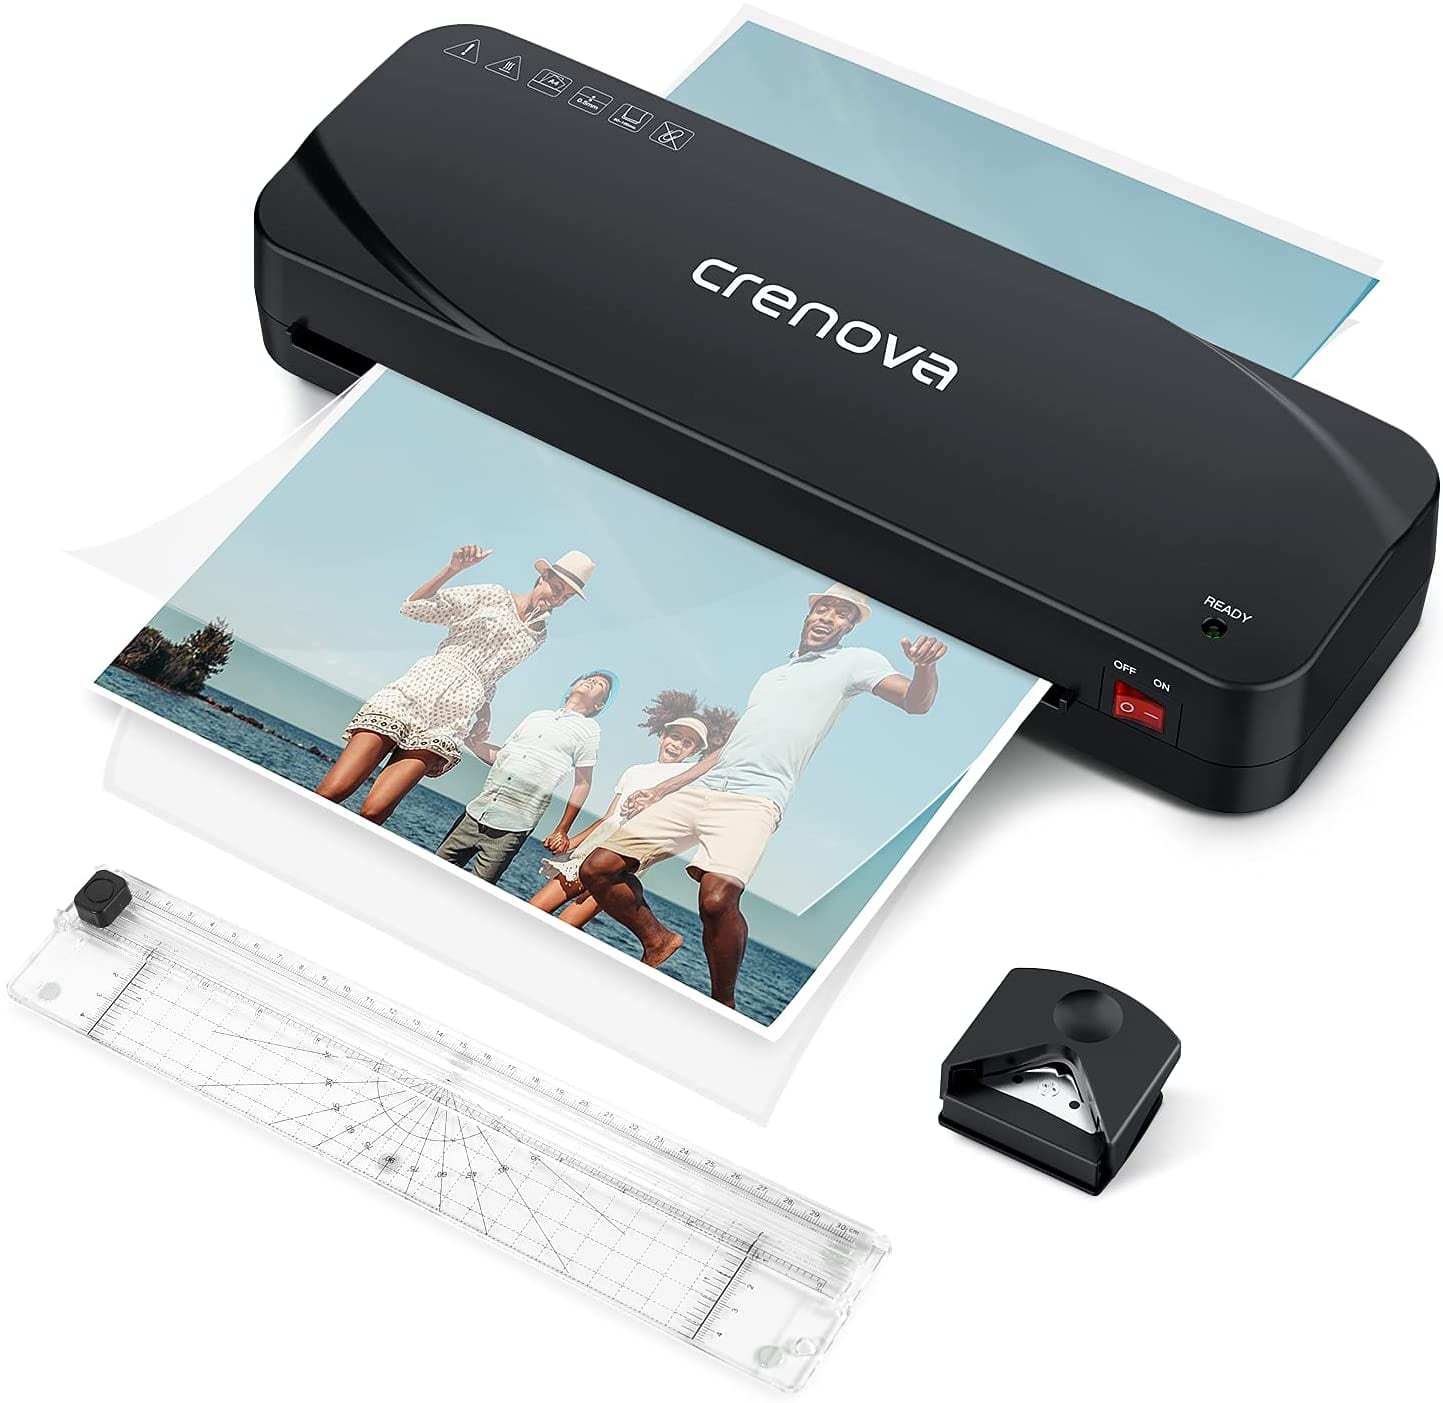 Crenova A4 laminator with paper cutter and corner rounded (Best Laminators)